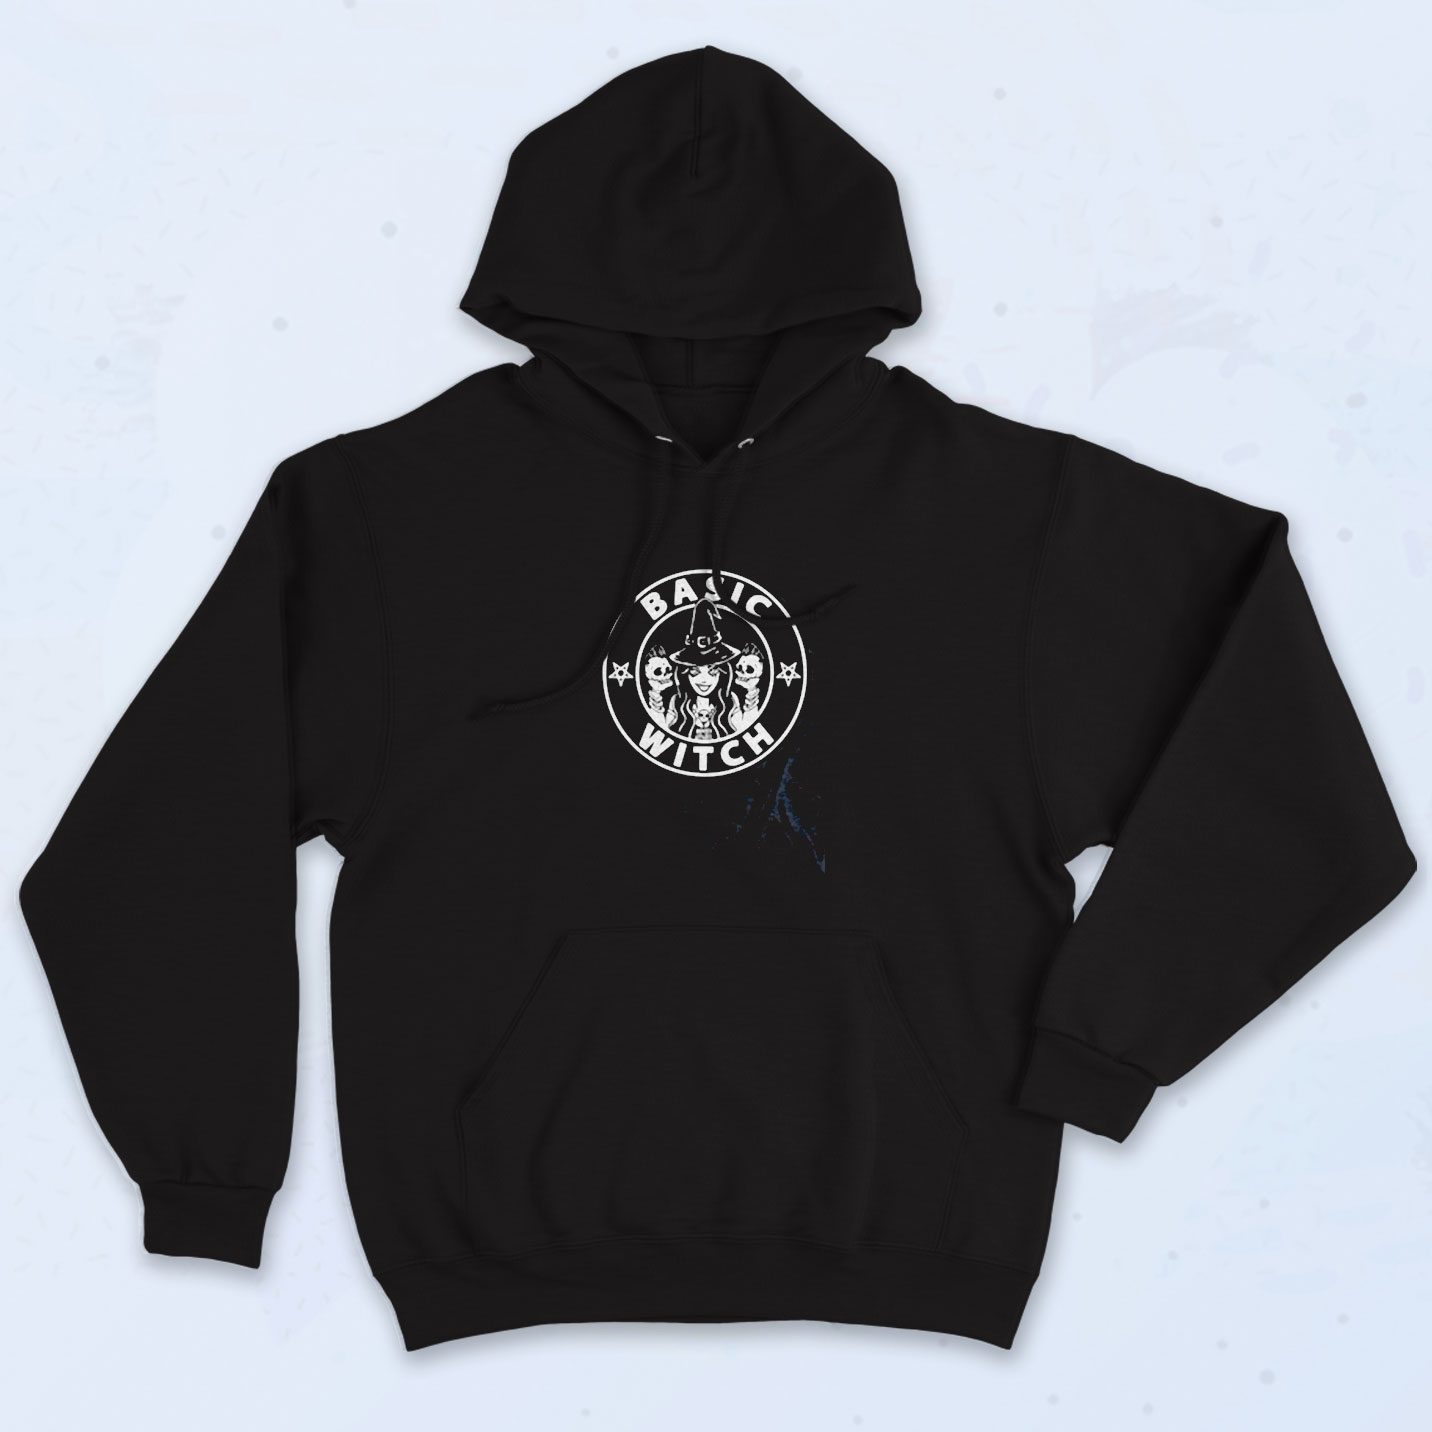 Basic Witch Goth Halloween Aesthetic Hoodie - 90sclothes.com